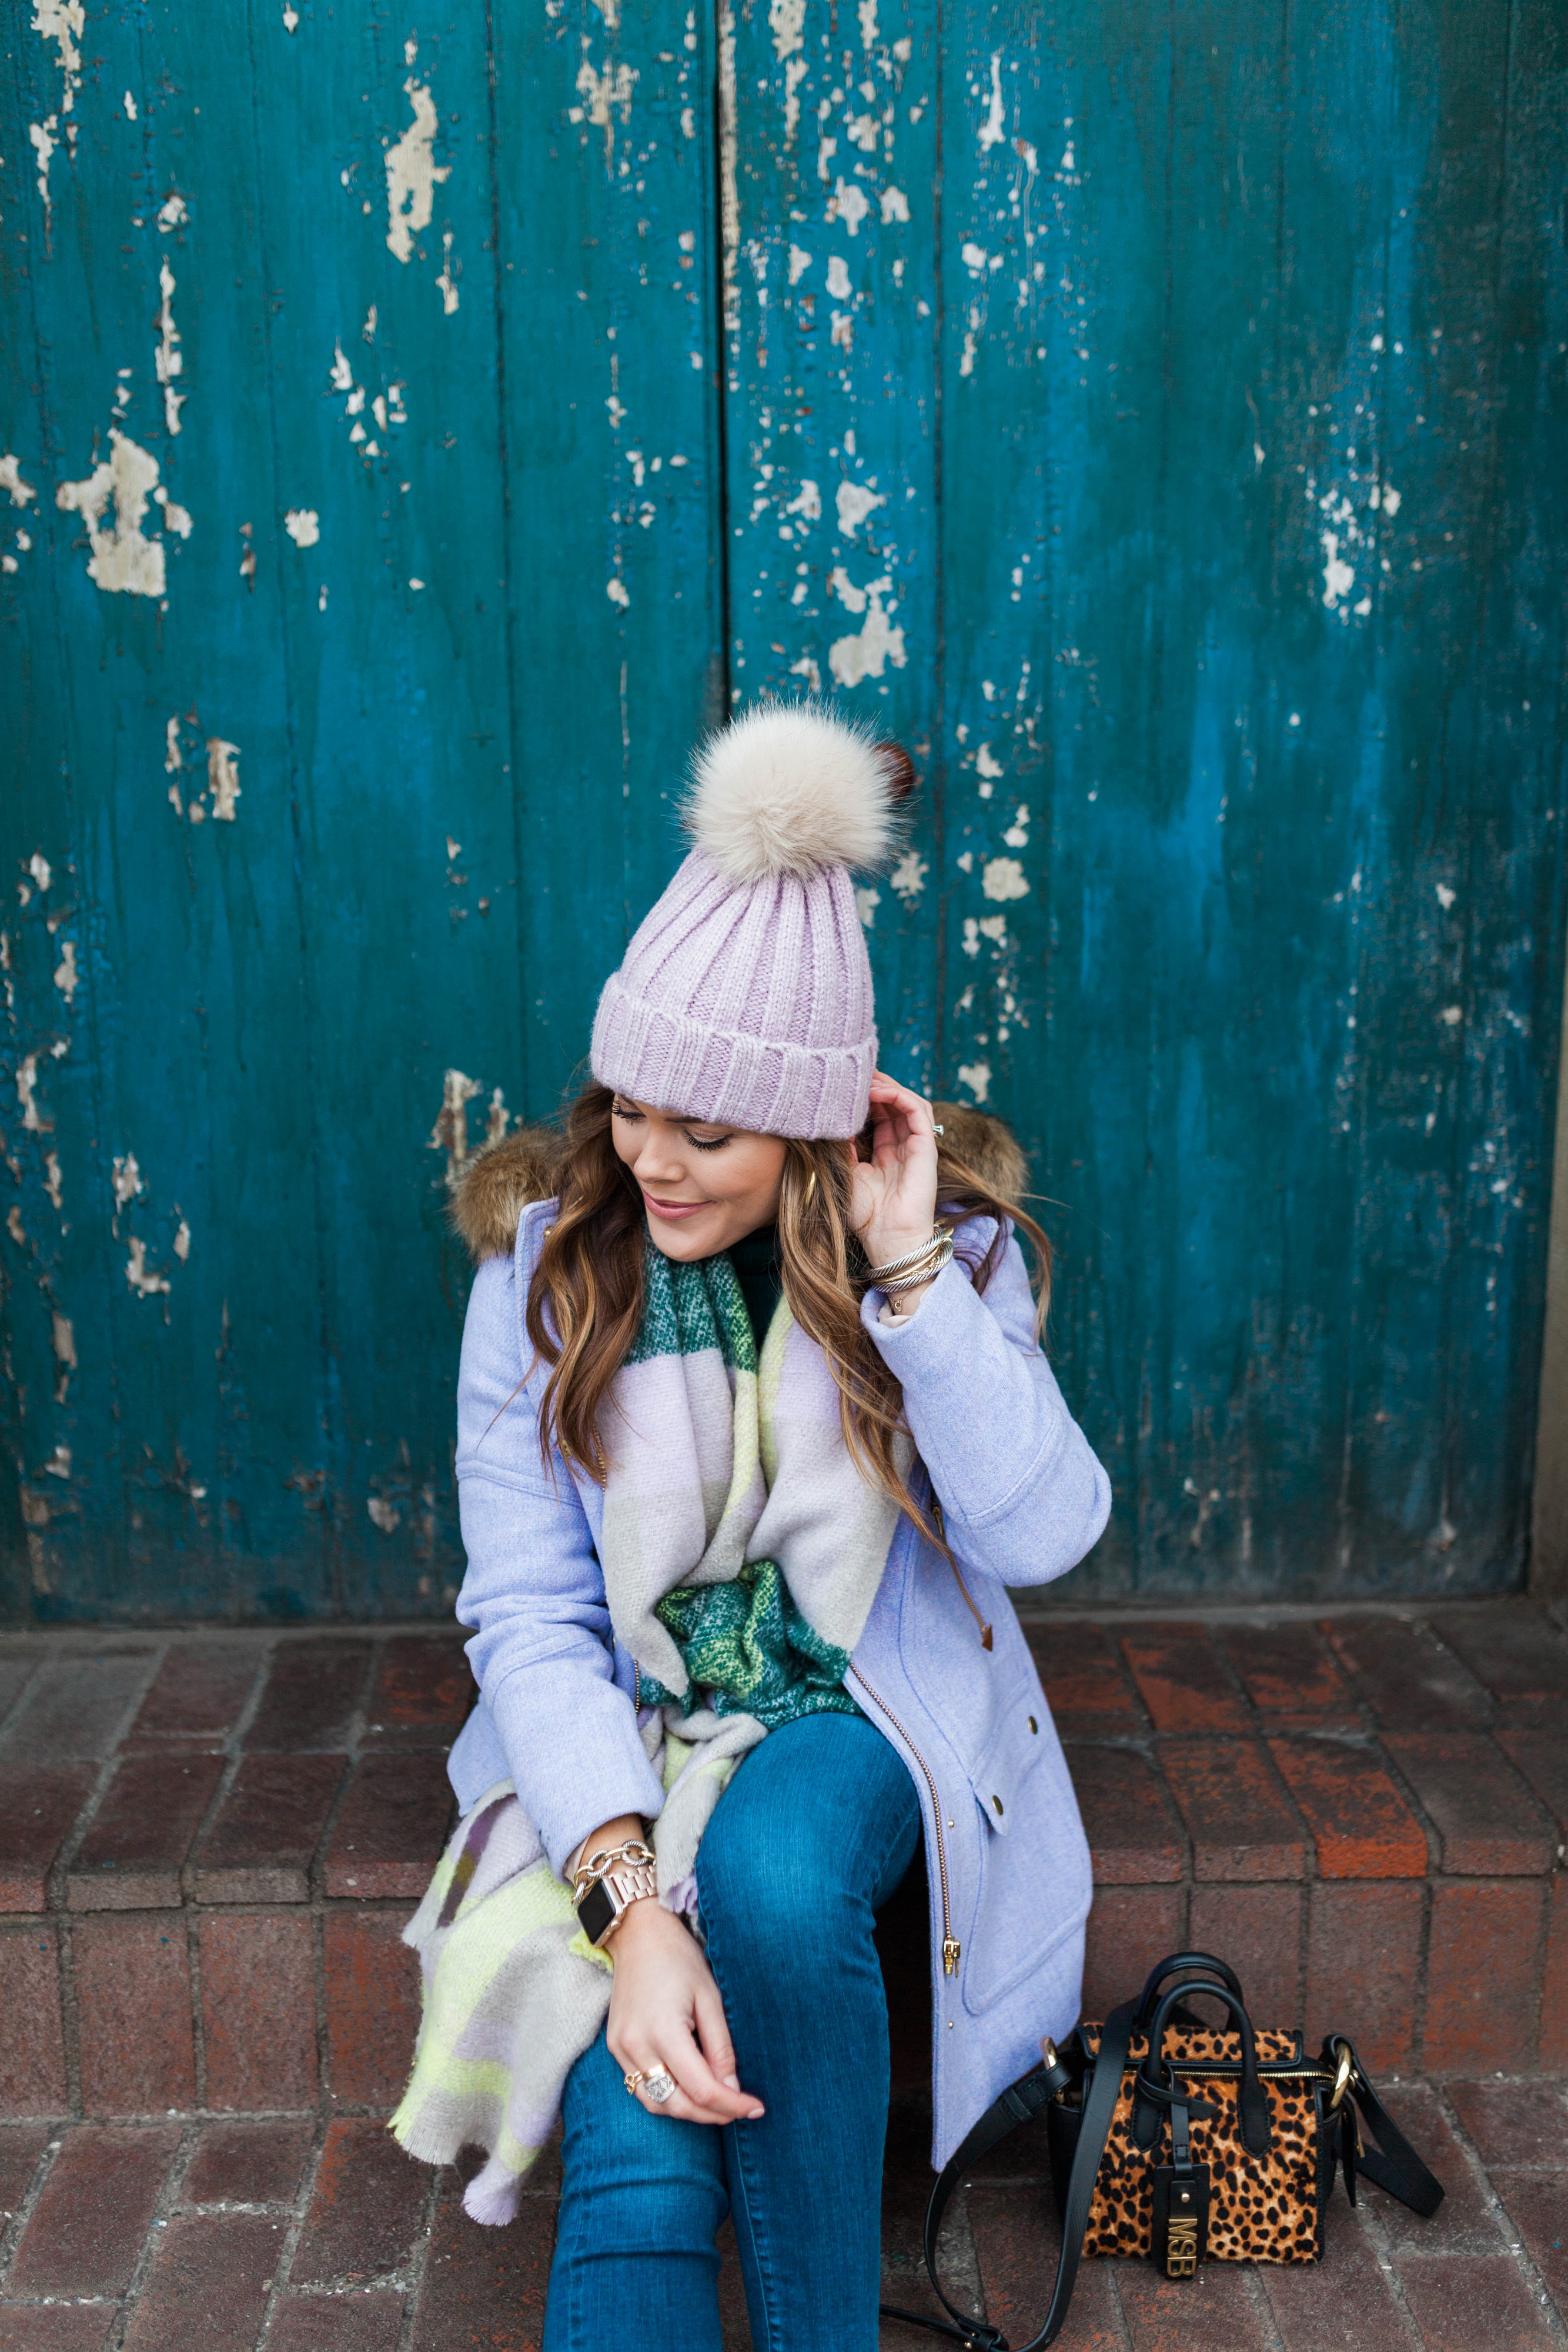 Fun Winter Parka / Casual Winter Outfit